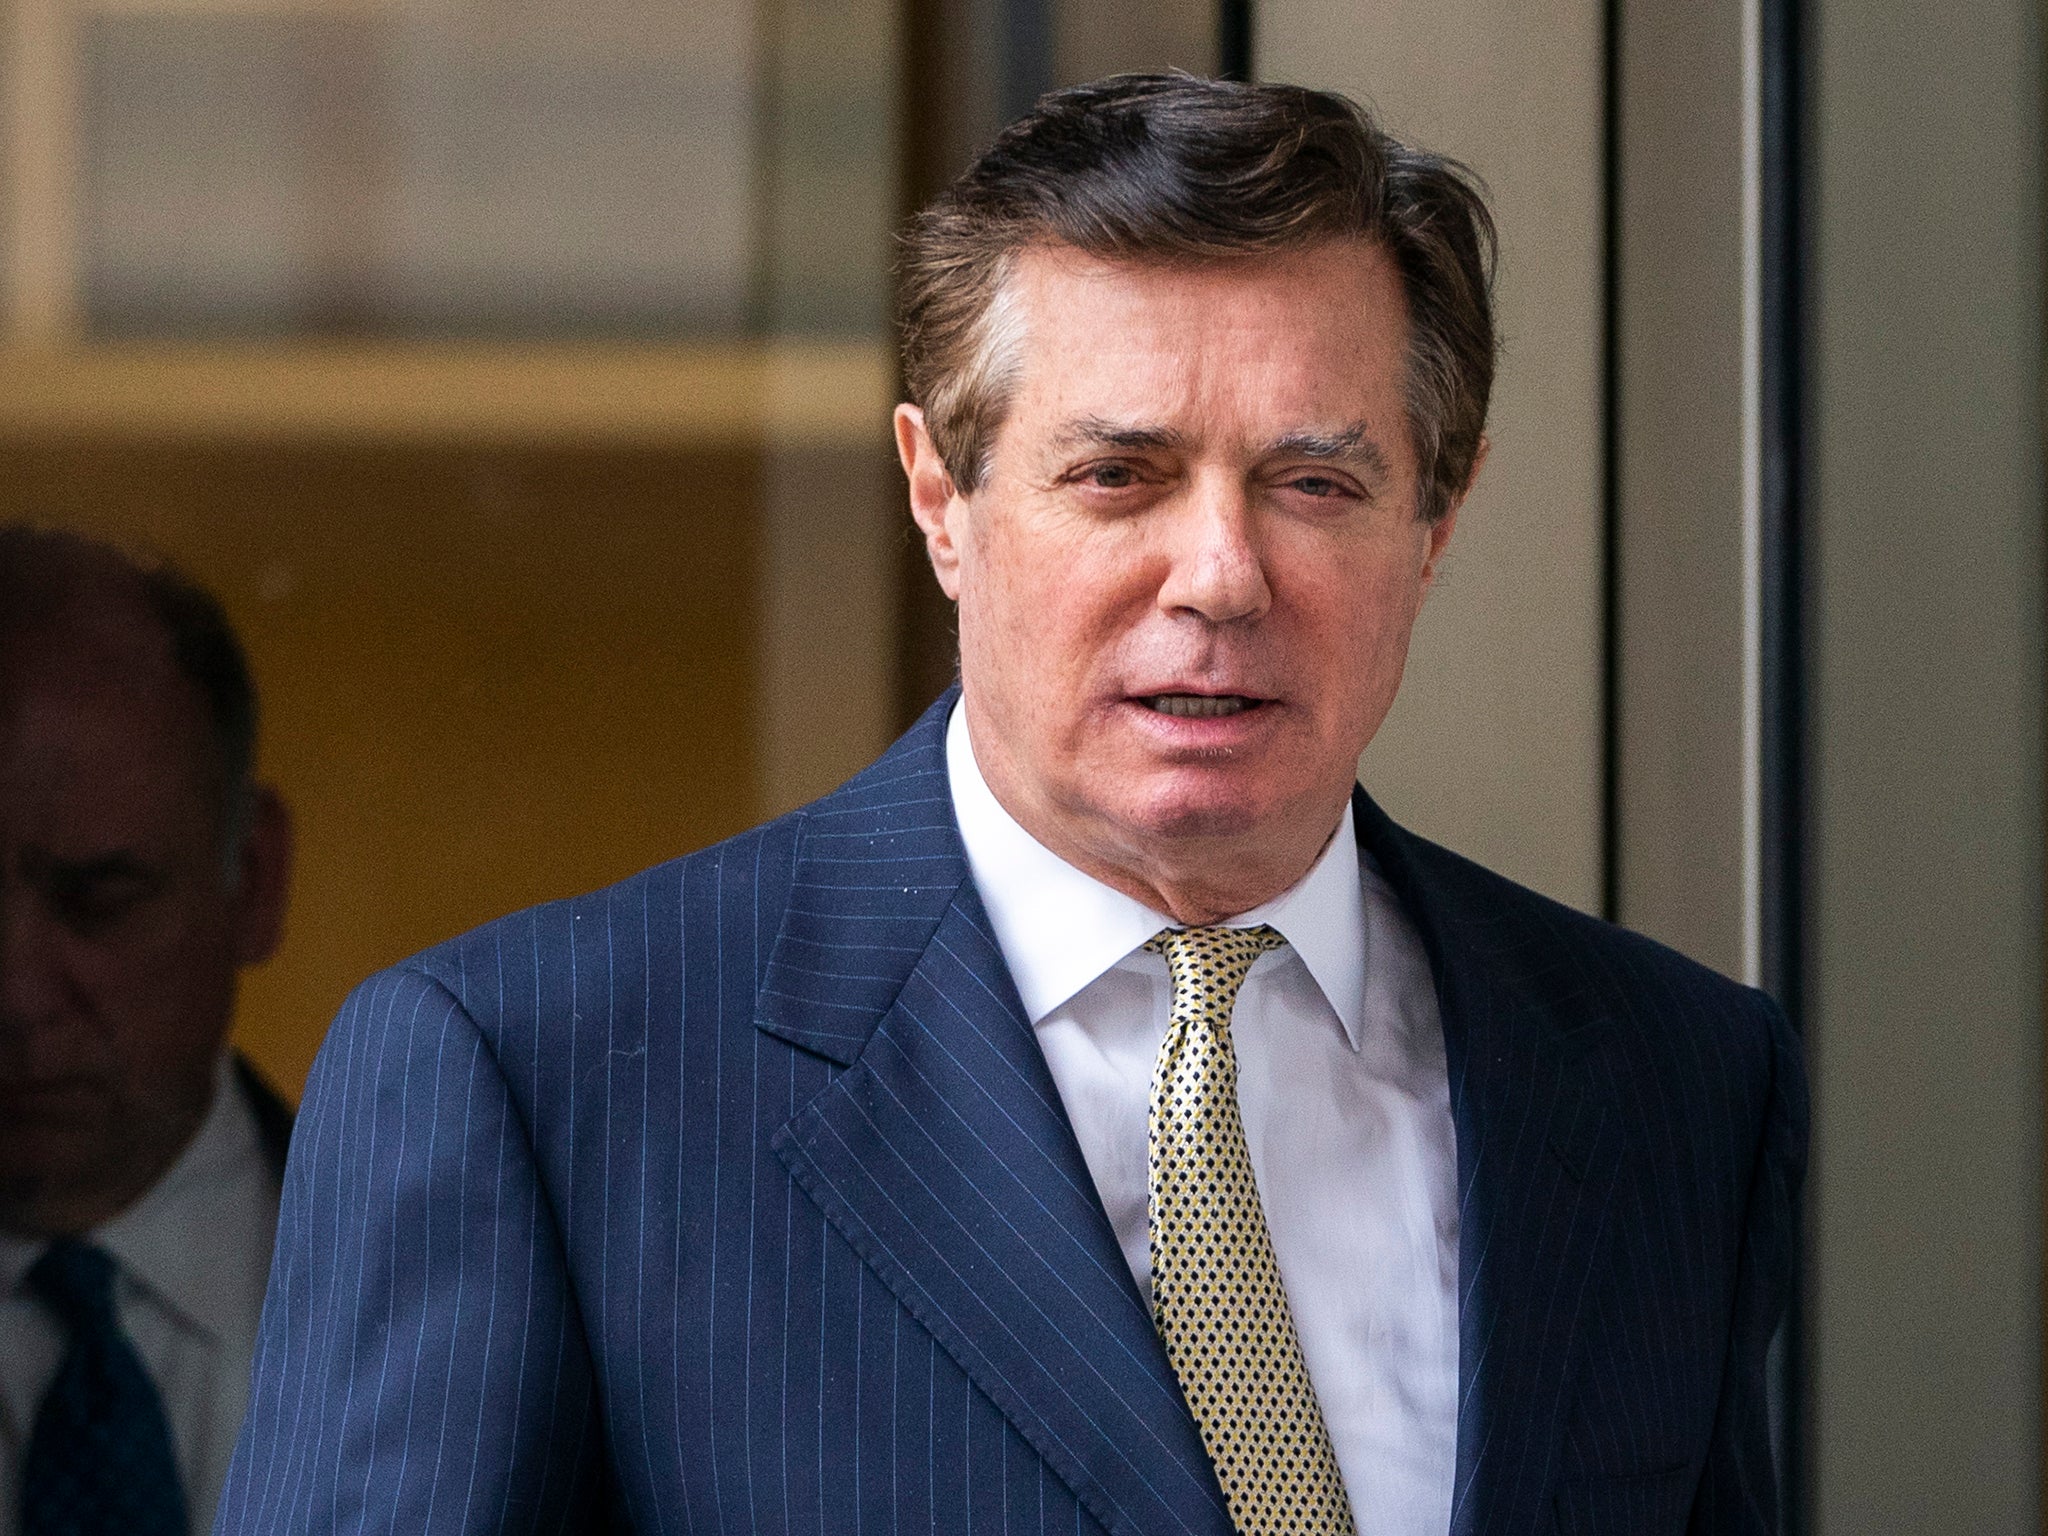 In August 2016 it was revealed that Manafort had received secret payments from the pro-Kremlin party of Viktor Yanukovych, Ukraine's ousted president